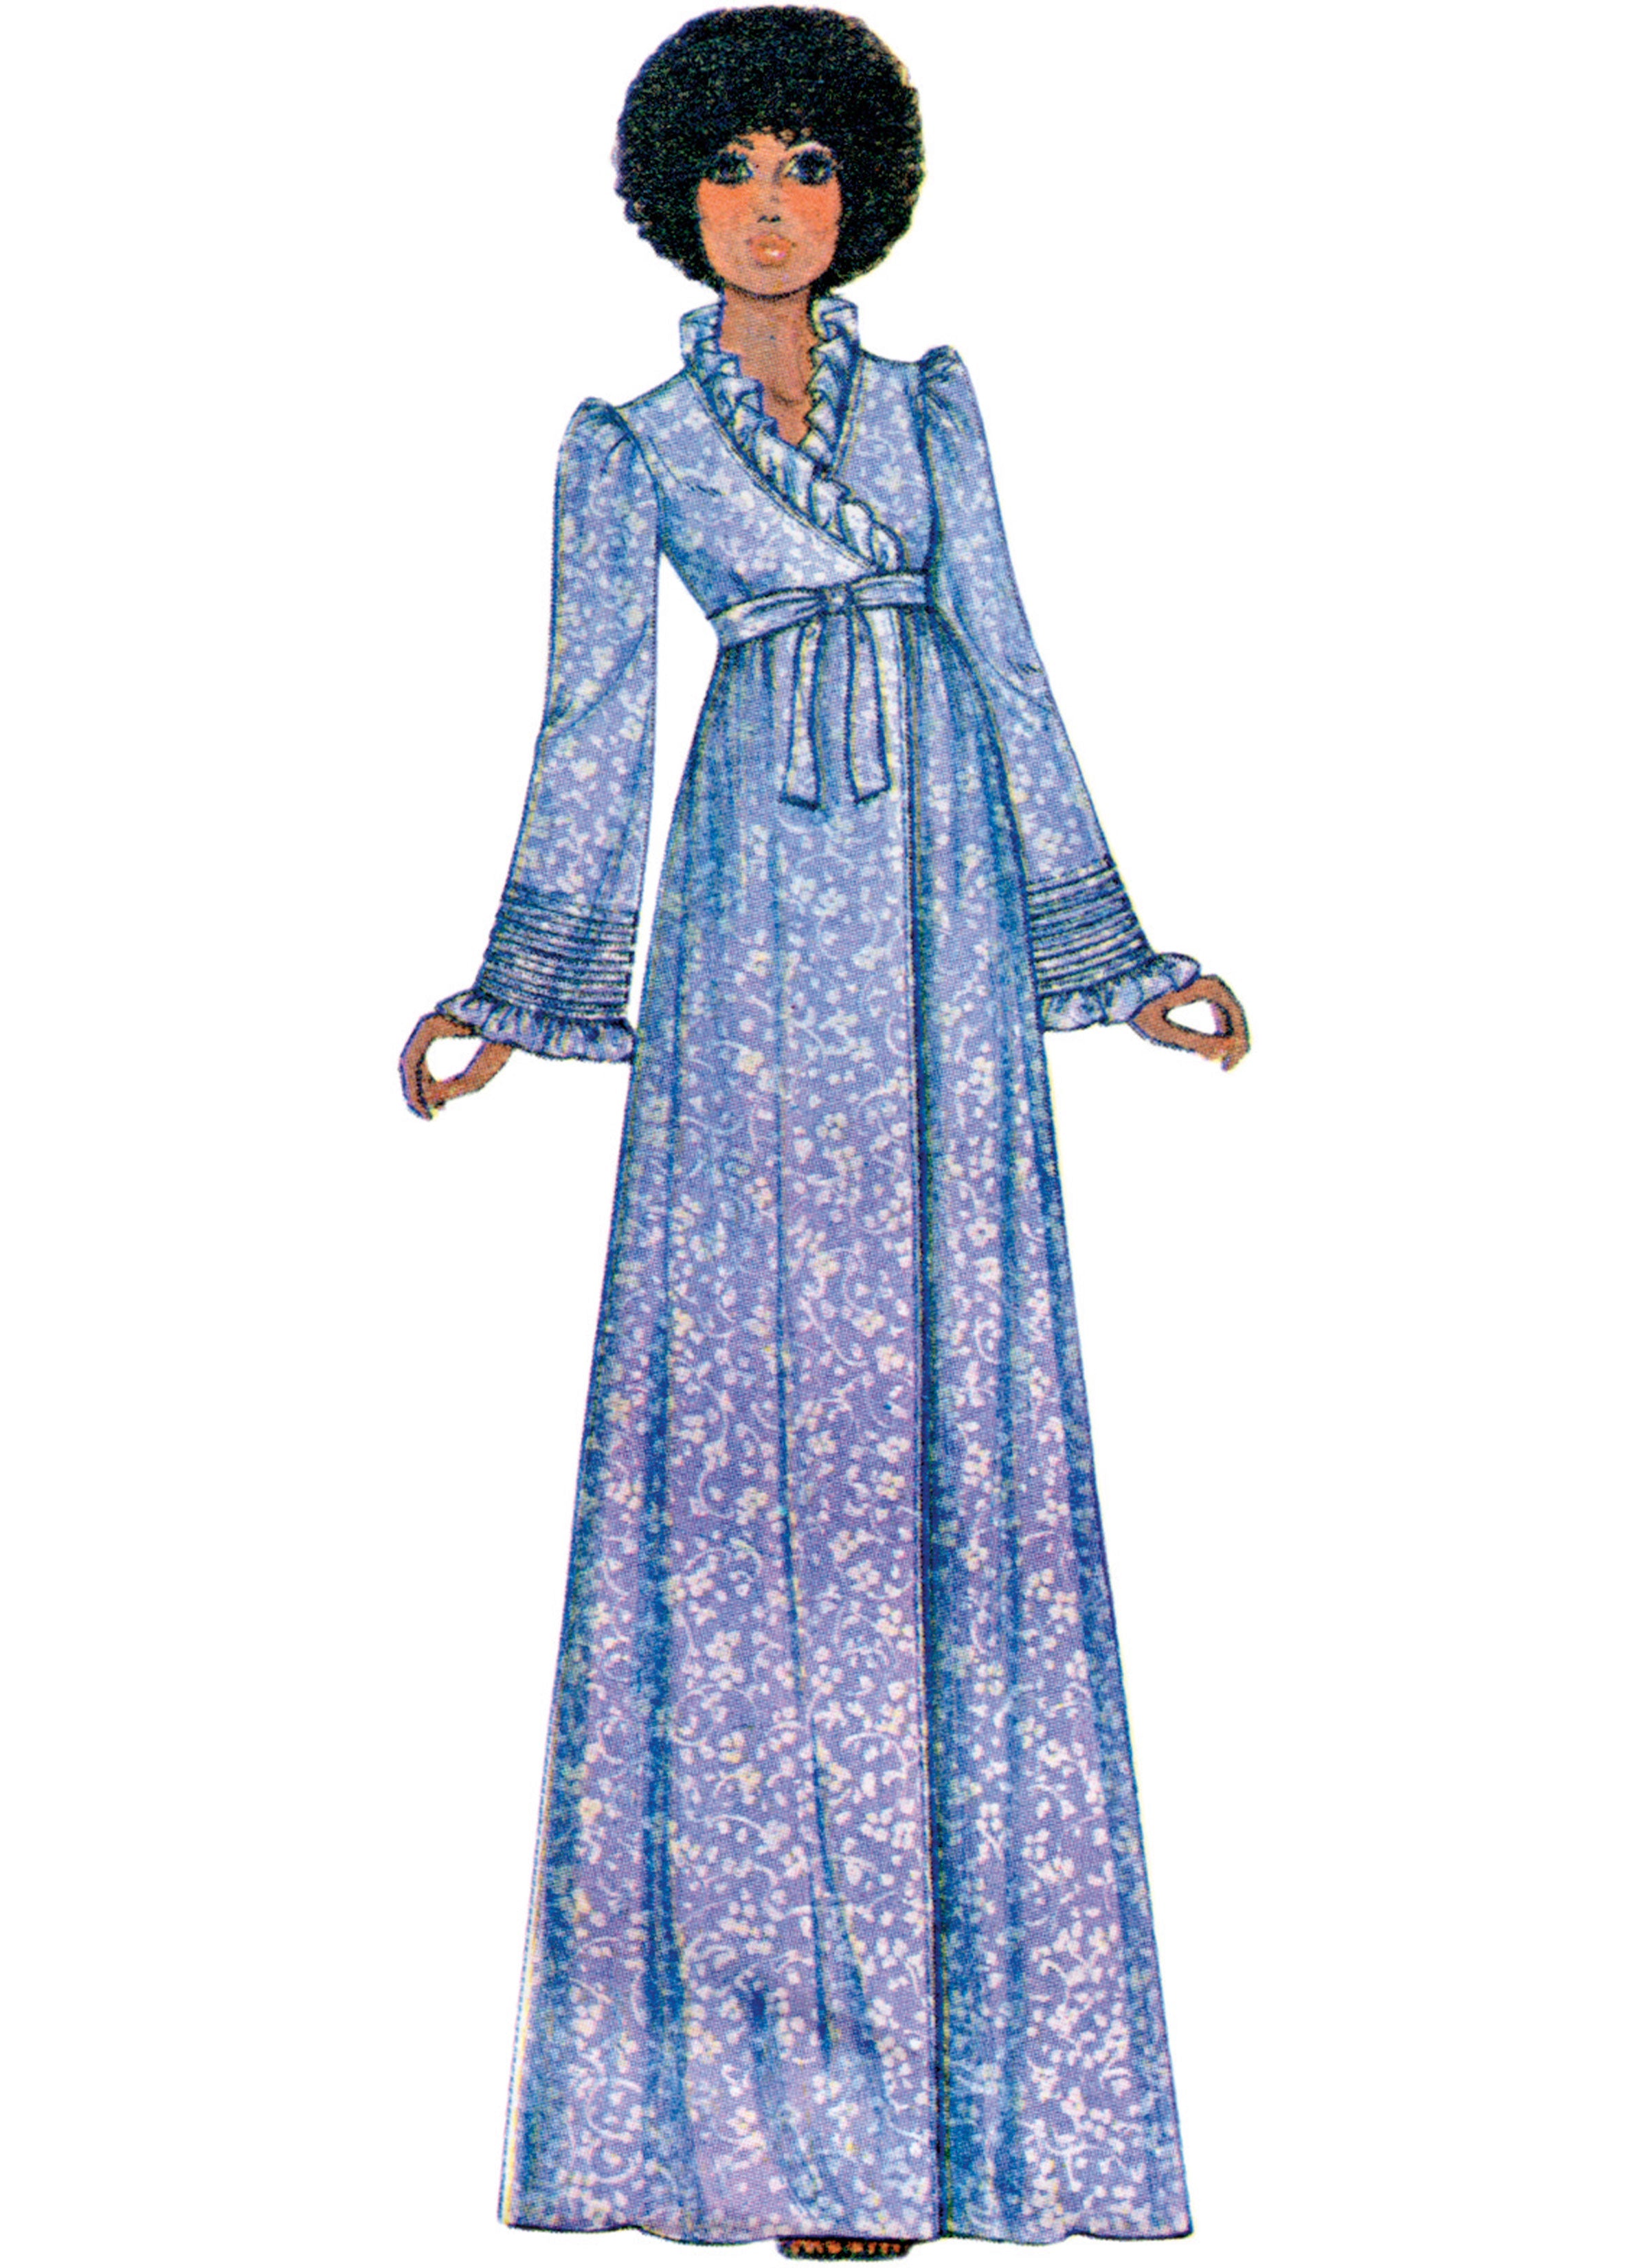 McCall's sewing pattern M8430 Misses' Robe and Nightgown from Jaycotts Sewing Supplies